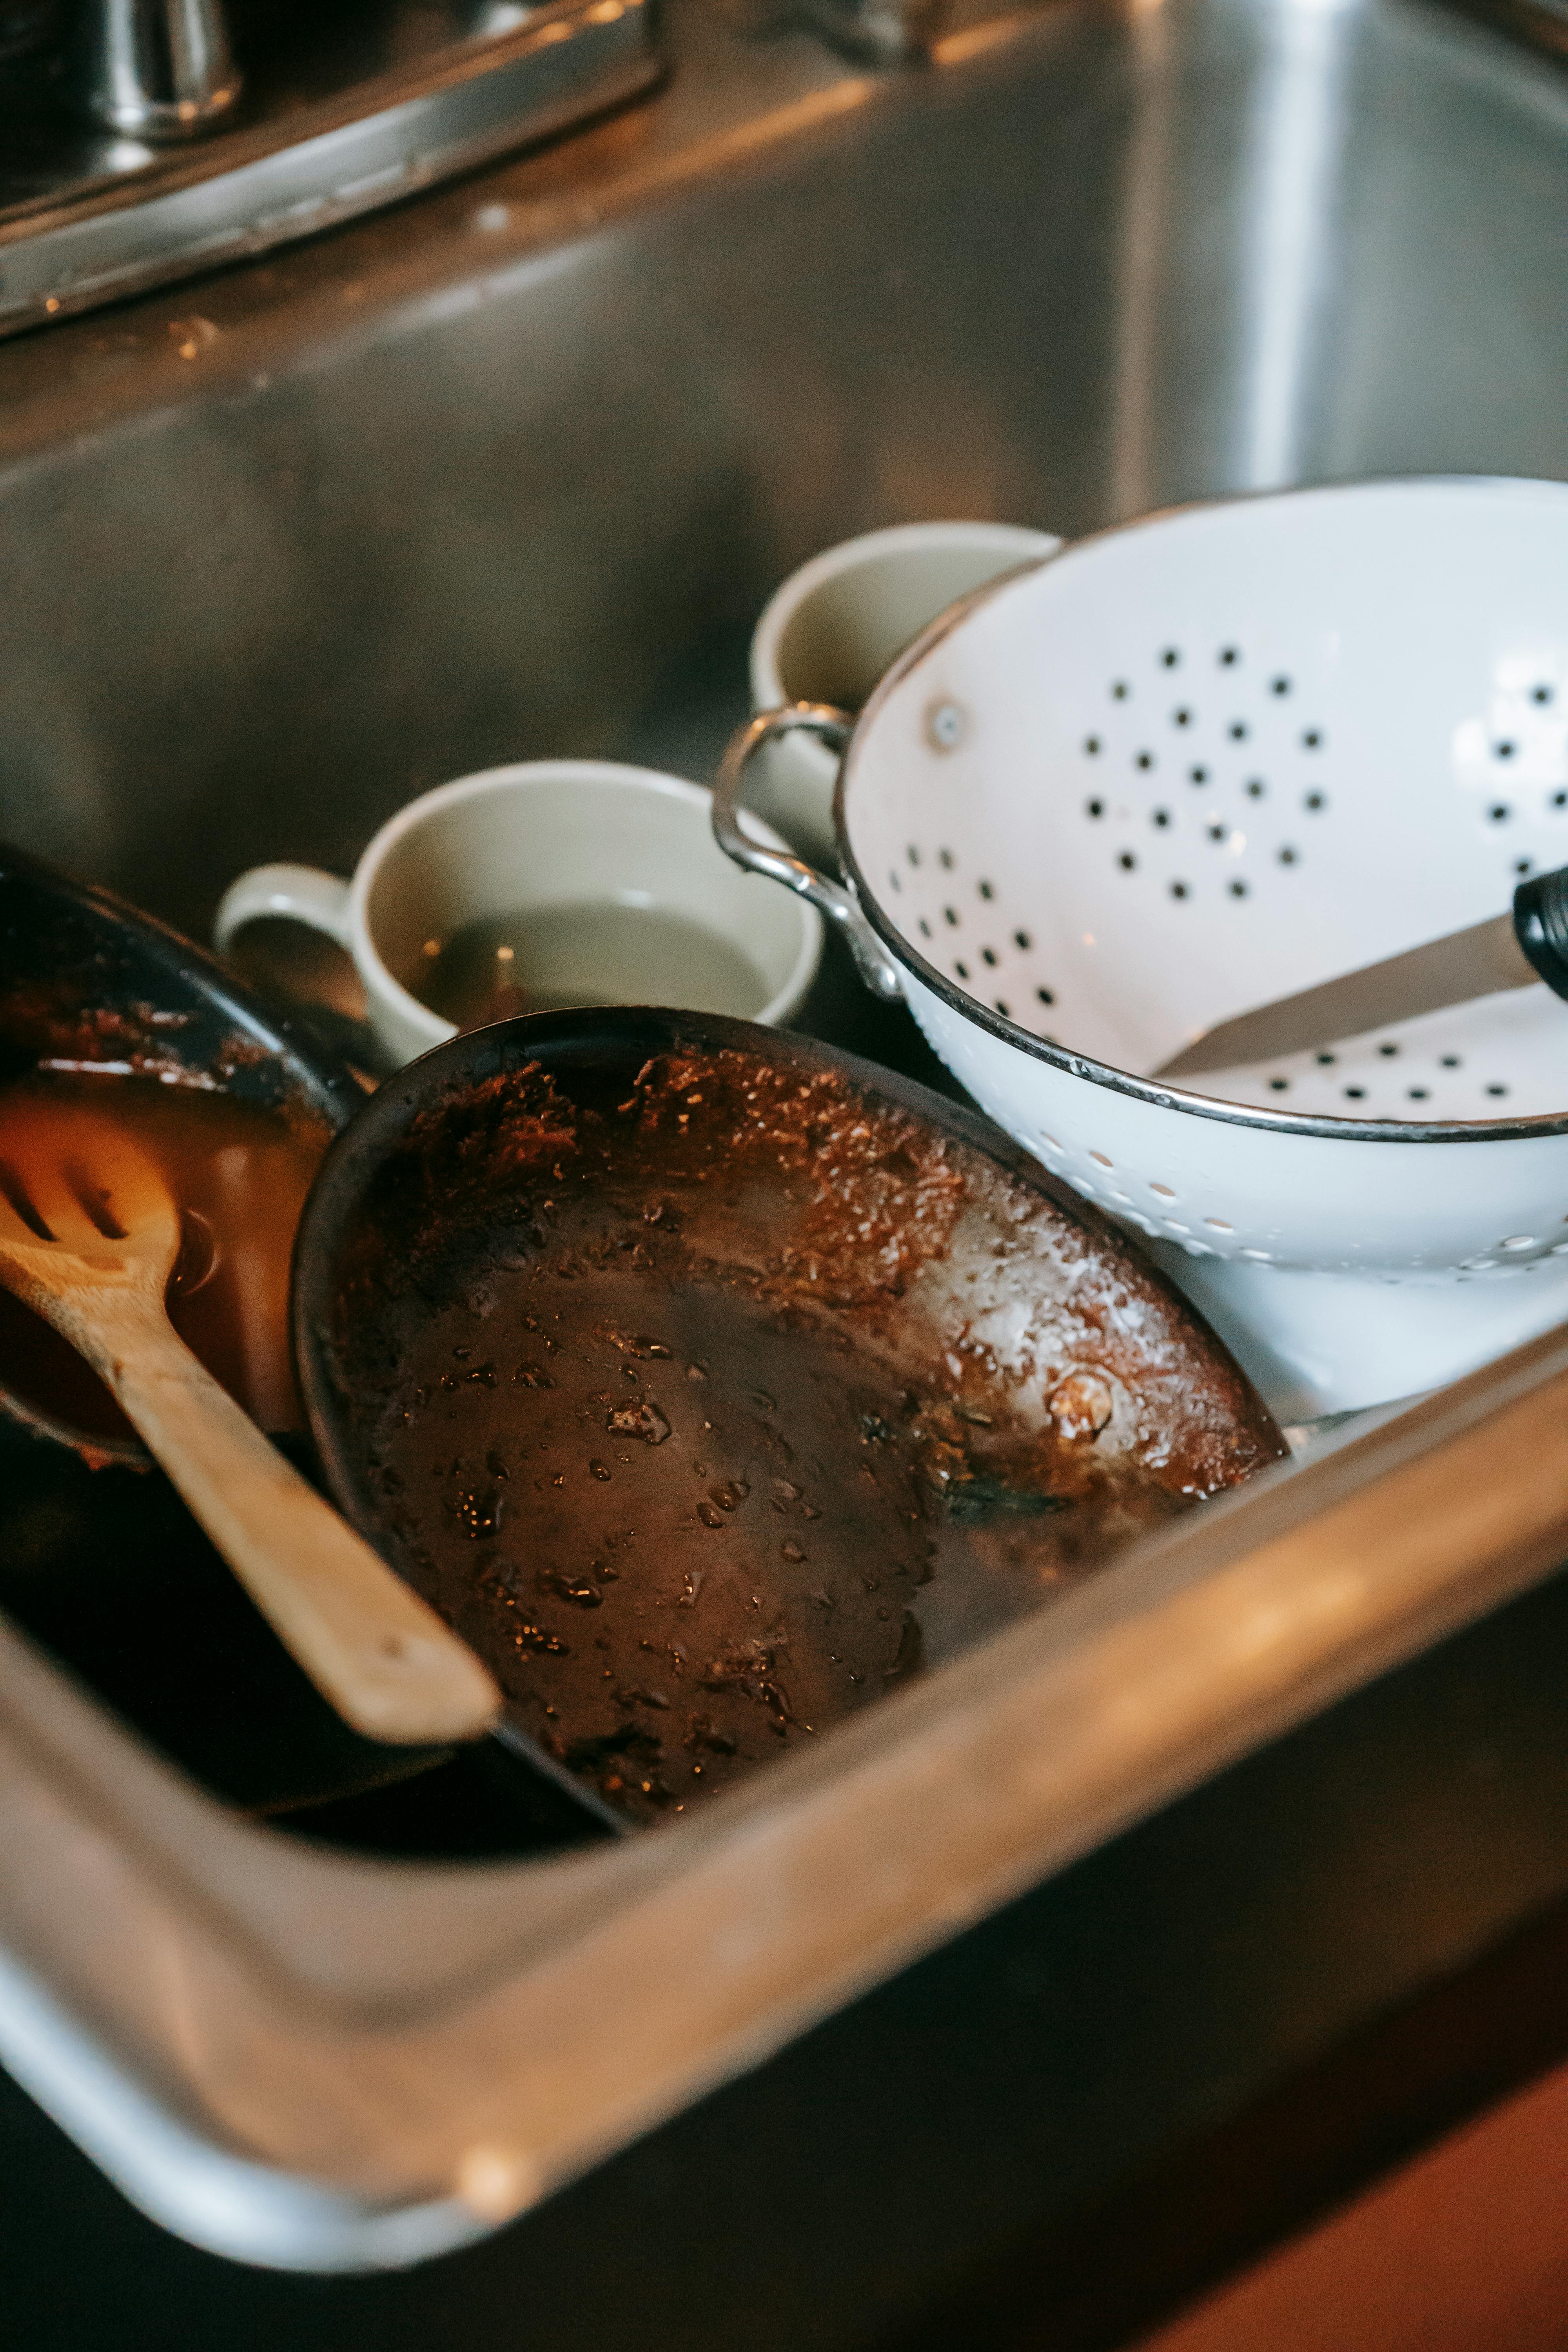 Dirty dishes in a sink | Source: Pexels